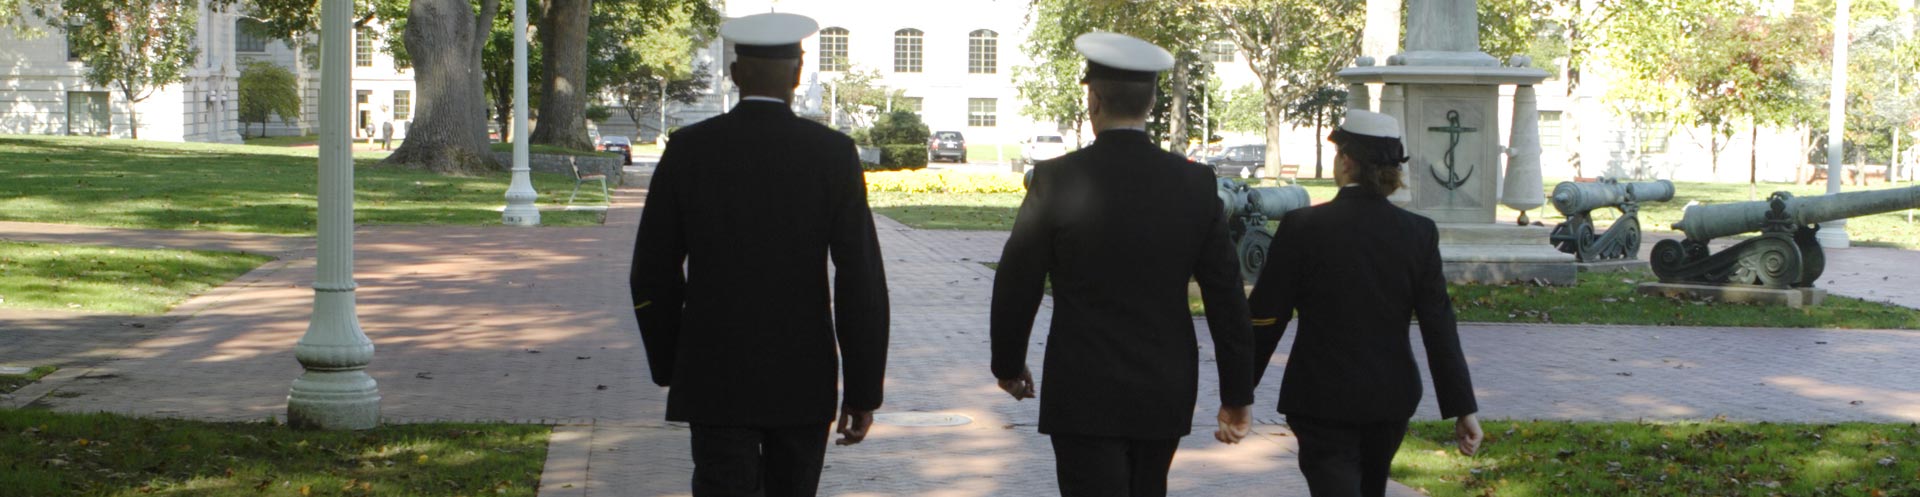 NROTC students walking on campus.